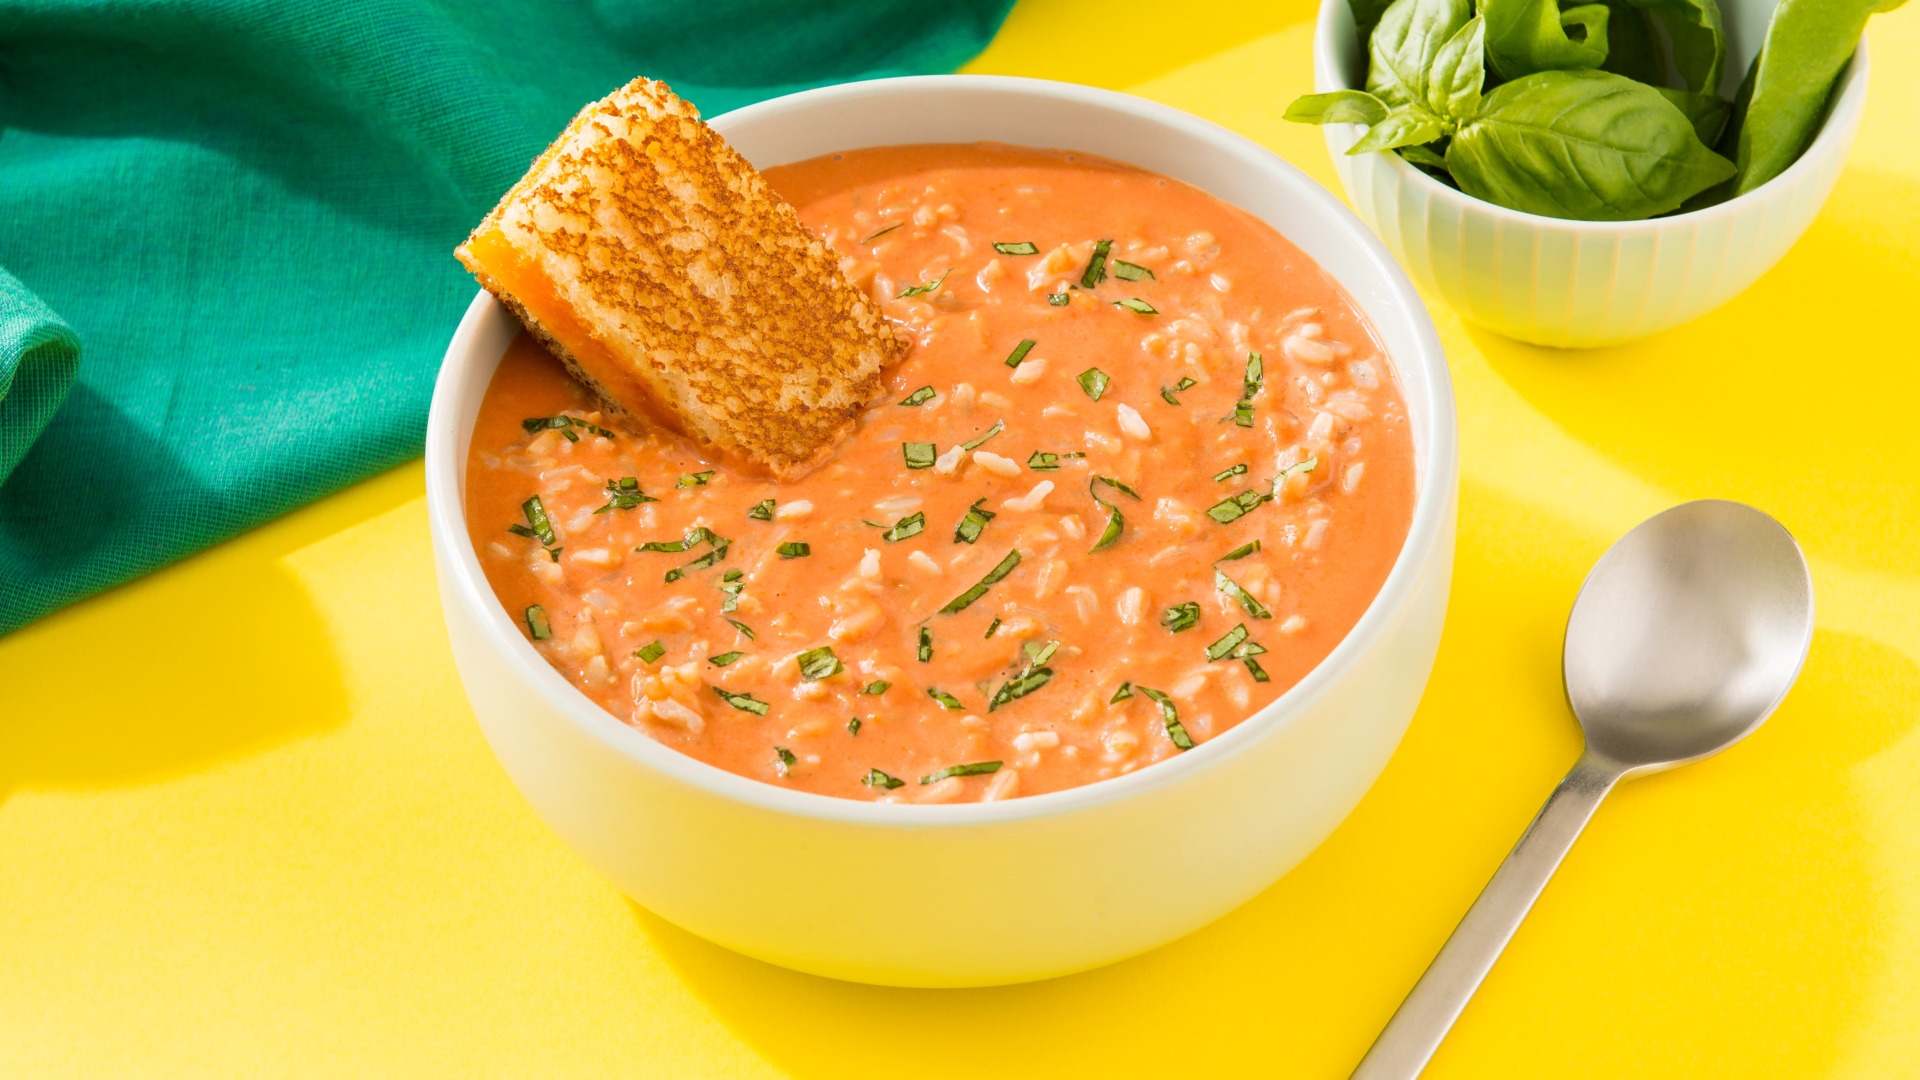 https://minuterice.com/wp-content/uploads/2019/03/Basil-Brown-Rice-and-Tomato-Soup.jpg